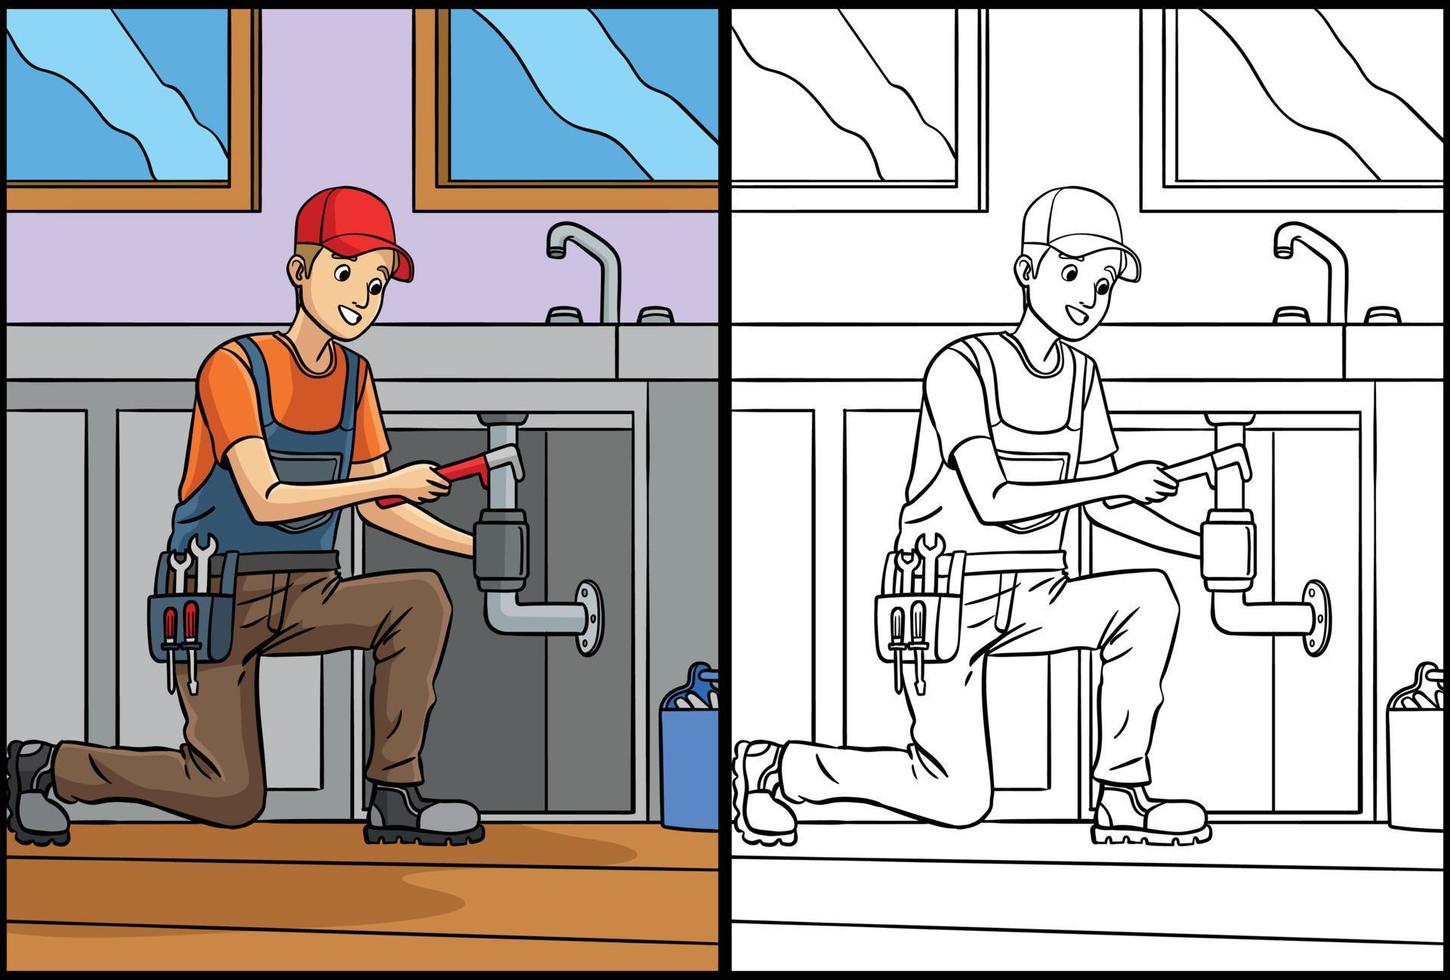 Plumber Coloring Page Colored Illustration vector